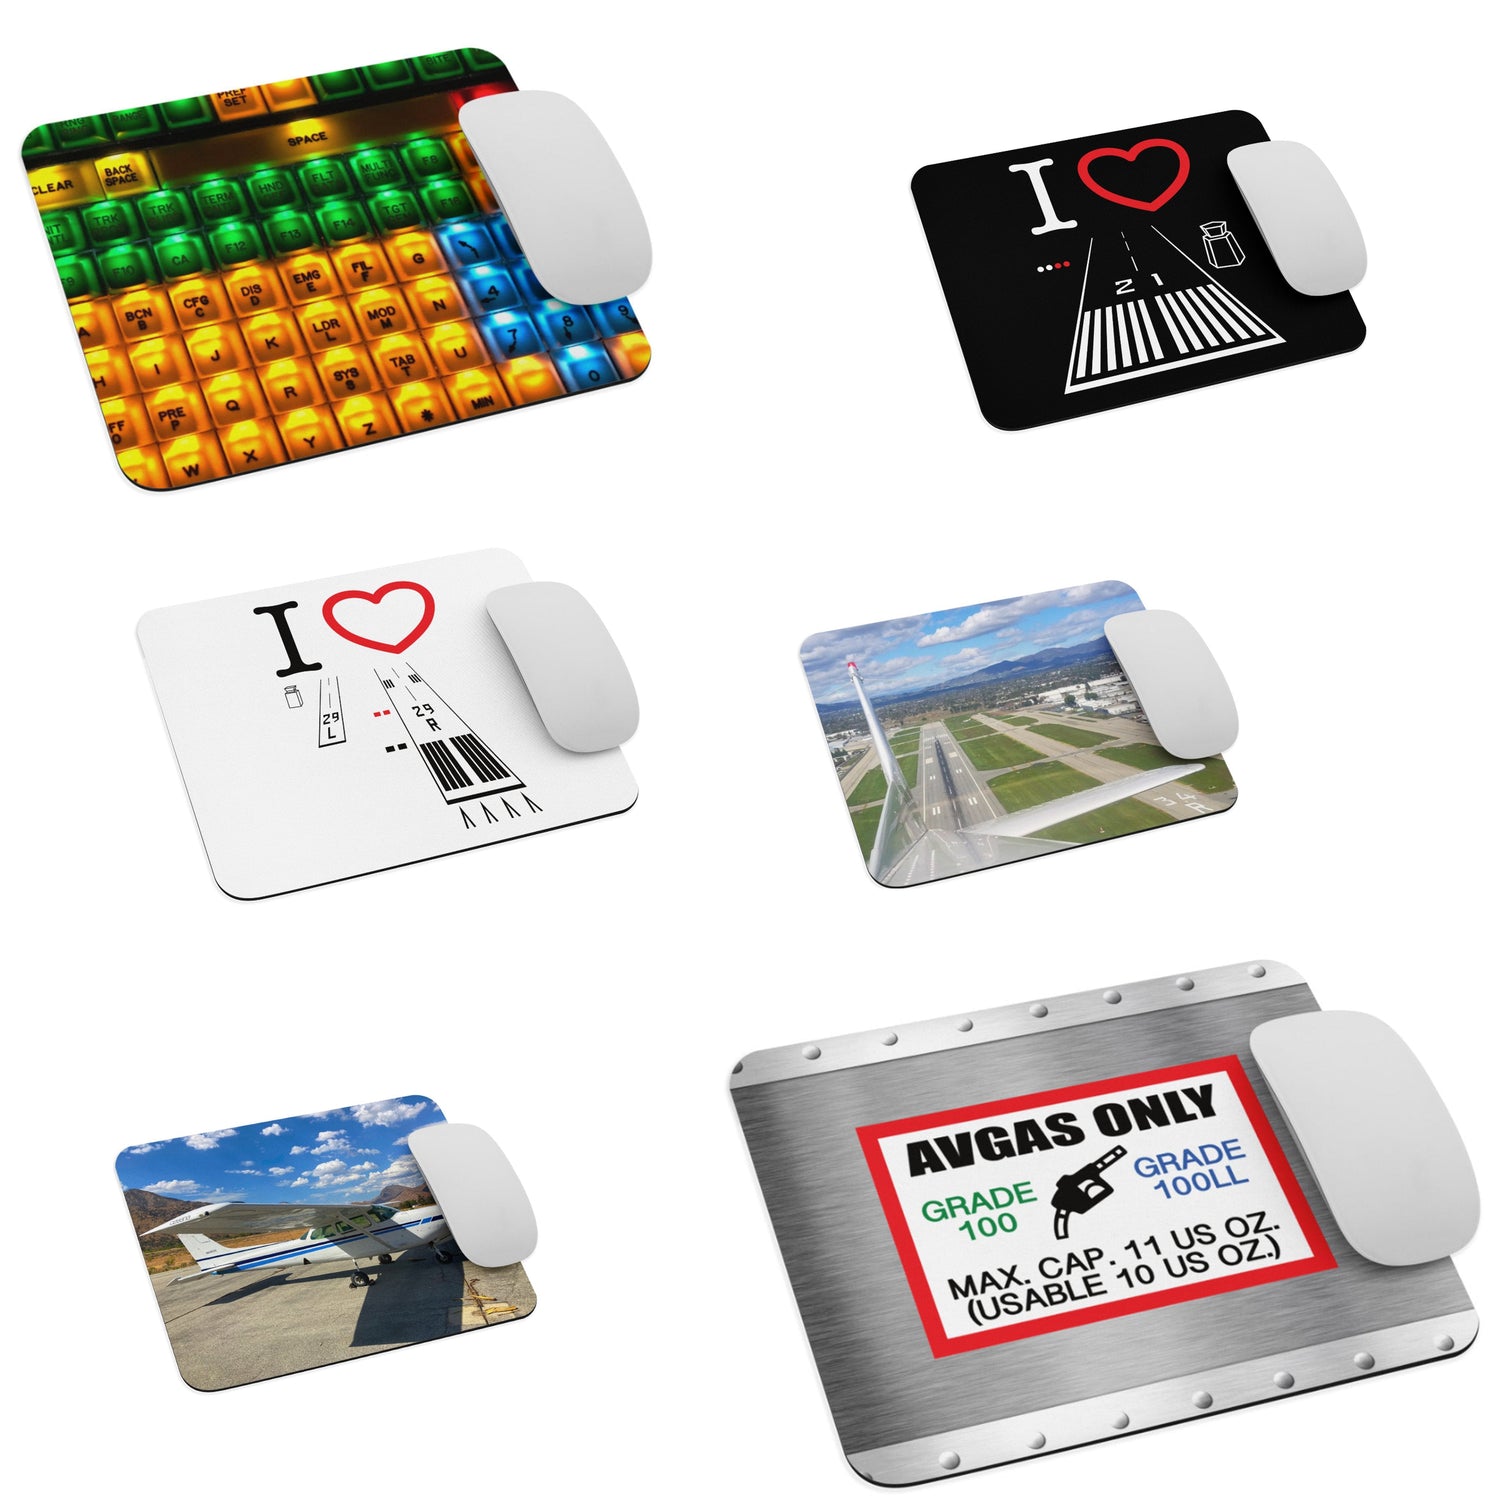 Aviation themed 8.7" x 7.1" mouse pads